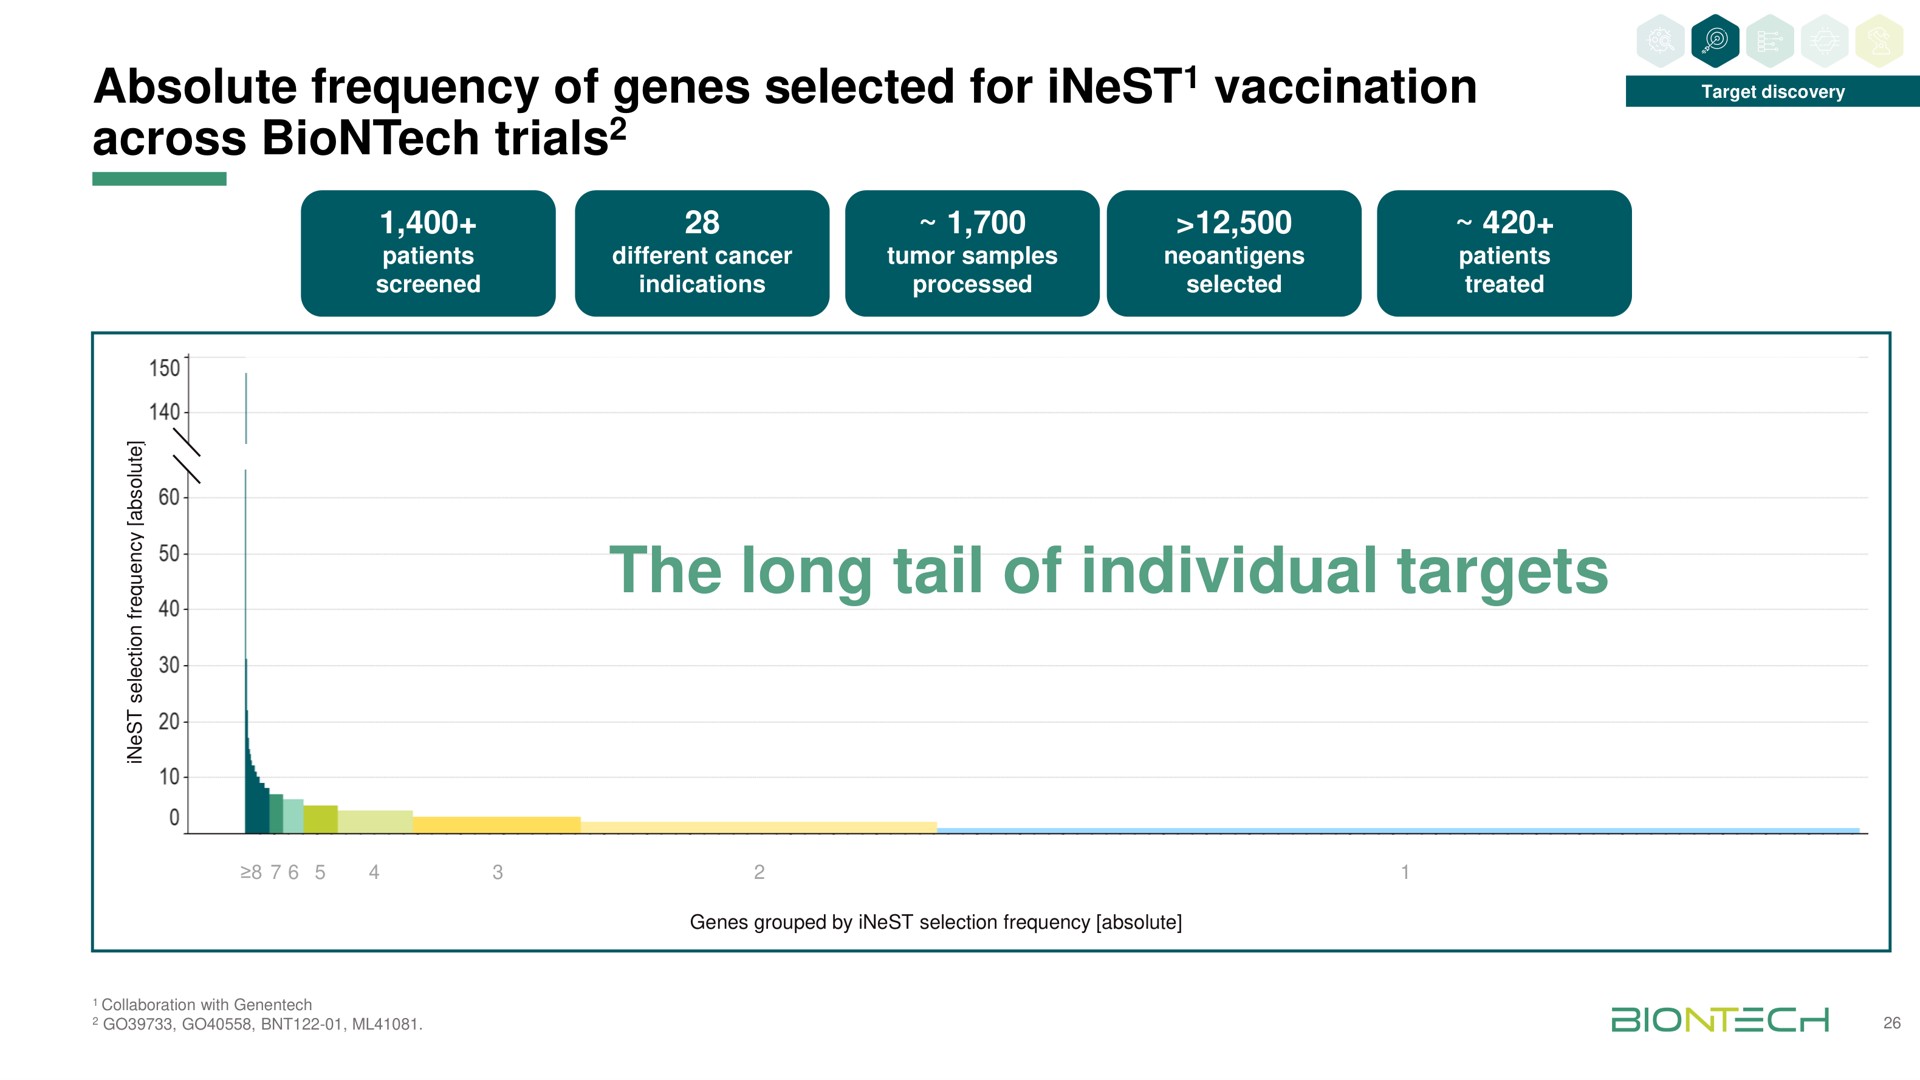 absolute frequency of genes selected for vaccination across trials the long tail of individual targets trials | BioNTech